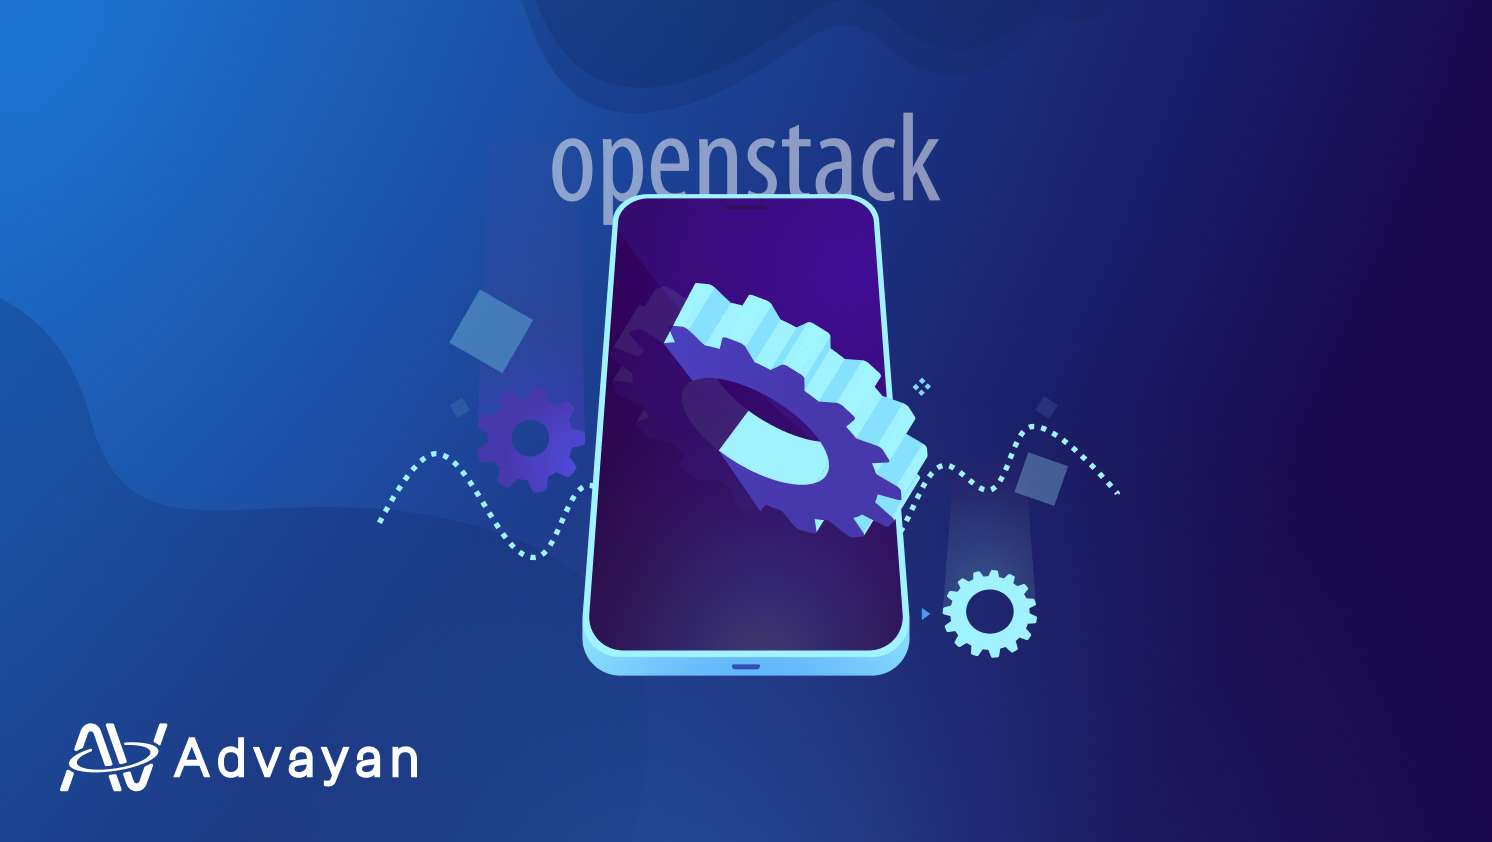 Here are some key aspects and components of OpenStack_